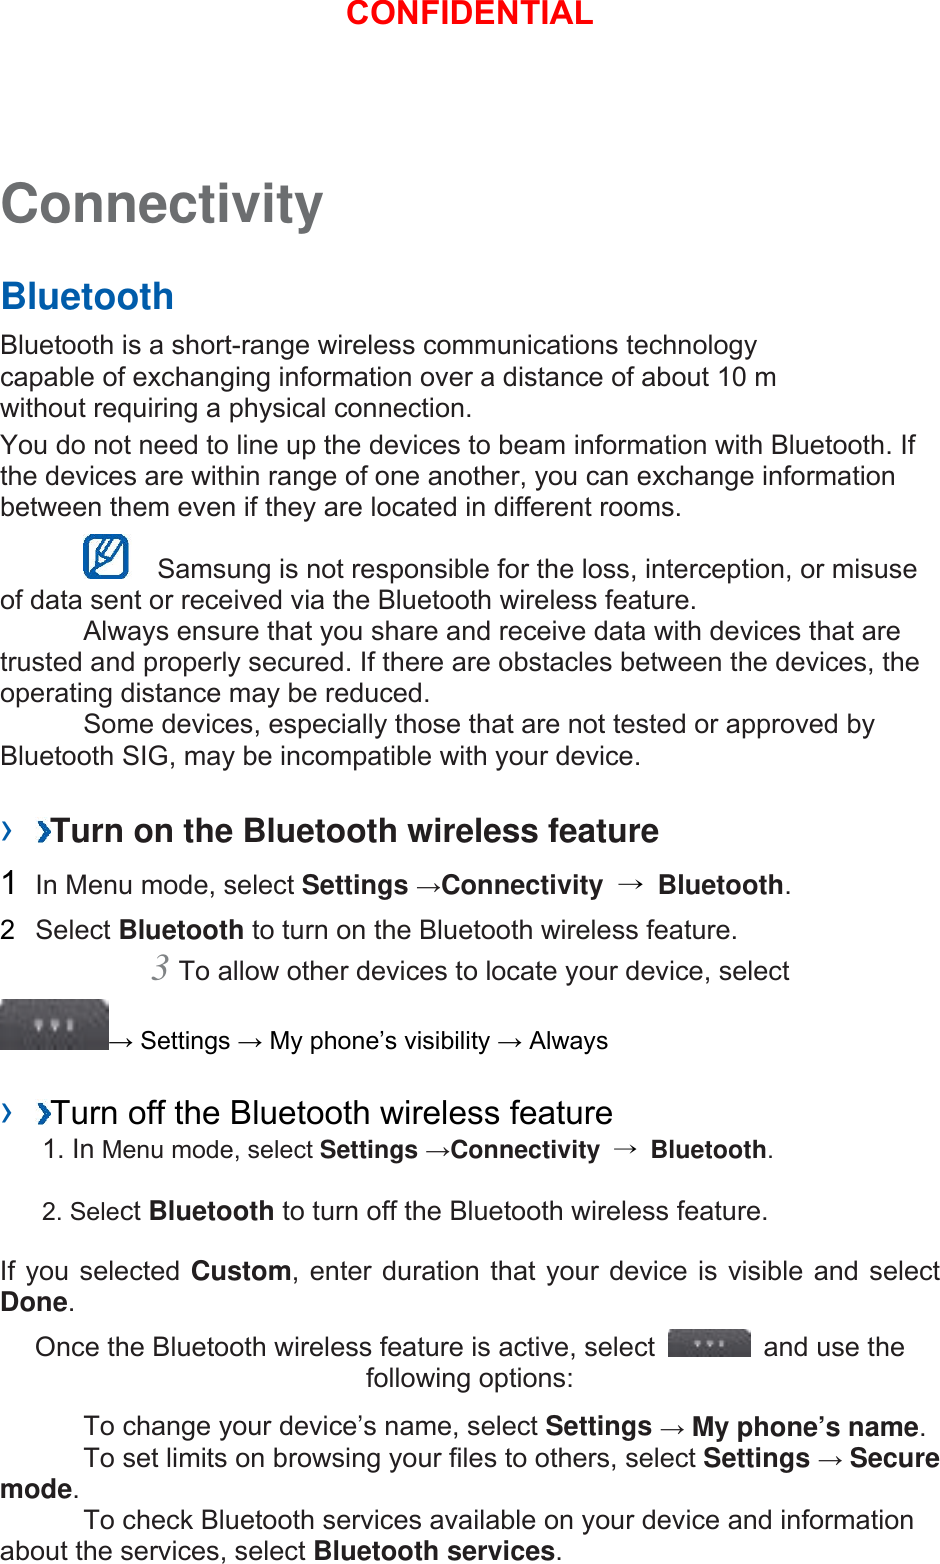 Connectivity   Bluetooth   Bluetooth is a short-range wireless communications technology capable of exchanging information over a distance of about 10 m without requiring a physical connection.   You do not need to line up the devices to beam information with Bluetooth. If the devices are within range of one another, you can exchange information between them even if they are located in different rooms.      Samsung is not responsible for the loss, interception, or misuse of data sent or received via the Bluetooth wireless feature.     Always ensure that you share and receive data with devices that are trusted and properly secured. If there are obstacles between the devices, the operating distance may be reduced.     Some devices, especially those that are not tested or approved by Bluetooth SIG, may be incompatible with your device.    ›  Turn on the Bluetooth wireless feature   1  In Menu mode, select Settings →Connectivity  → Bluetooth.  2  Select Bluetooth to turn on the Bluetooth wireless feature.   3 To allow other devices to locate your device, select   → Settings → My phone’s visibility → Always    ›  Turn off the Bluetooth wireless feature   1. In Menu mode, select Settings →Connectivity  → Bluetooth. 2. Select Bluetooth to turn off the Bluetooth wireless feature. If you selected Custom, enter duration that your device is visible and select Done.  Once the Bluetooth wireless feature is active, select    and use the following options:     To change your device’s name, select Settings → My phone’s name.    To set limits on browsing your files to others, select Settings → Secure mode.    To check Bluetooth services available on your device and information about the services, select Bluetooth services.   CONFIDENTIAL